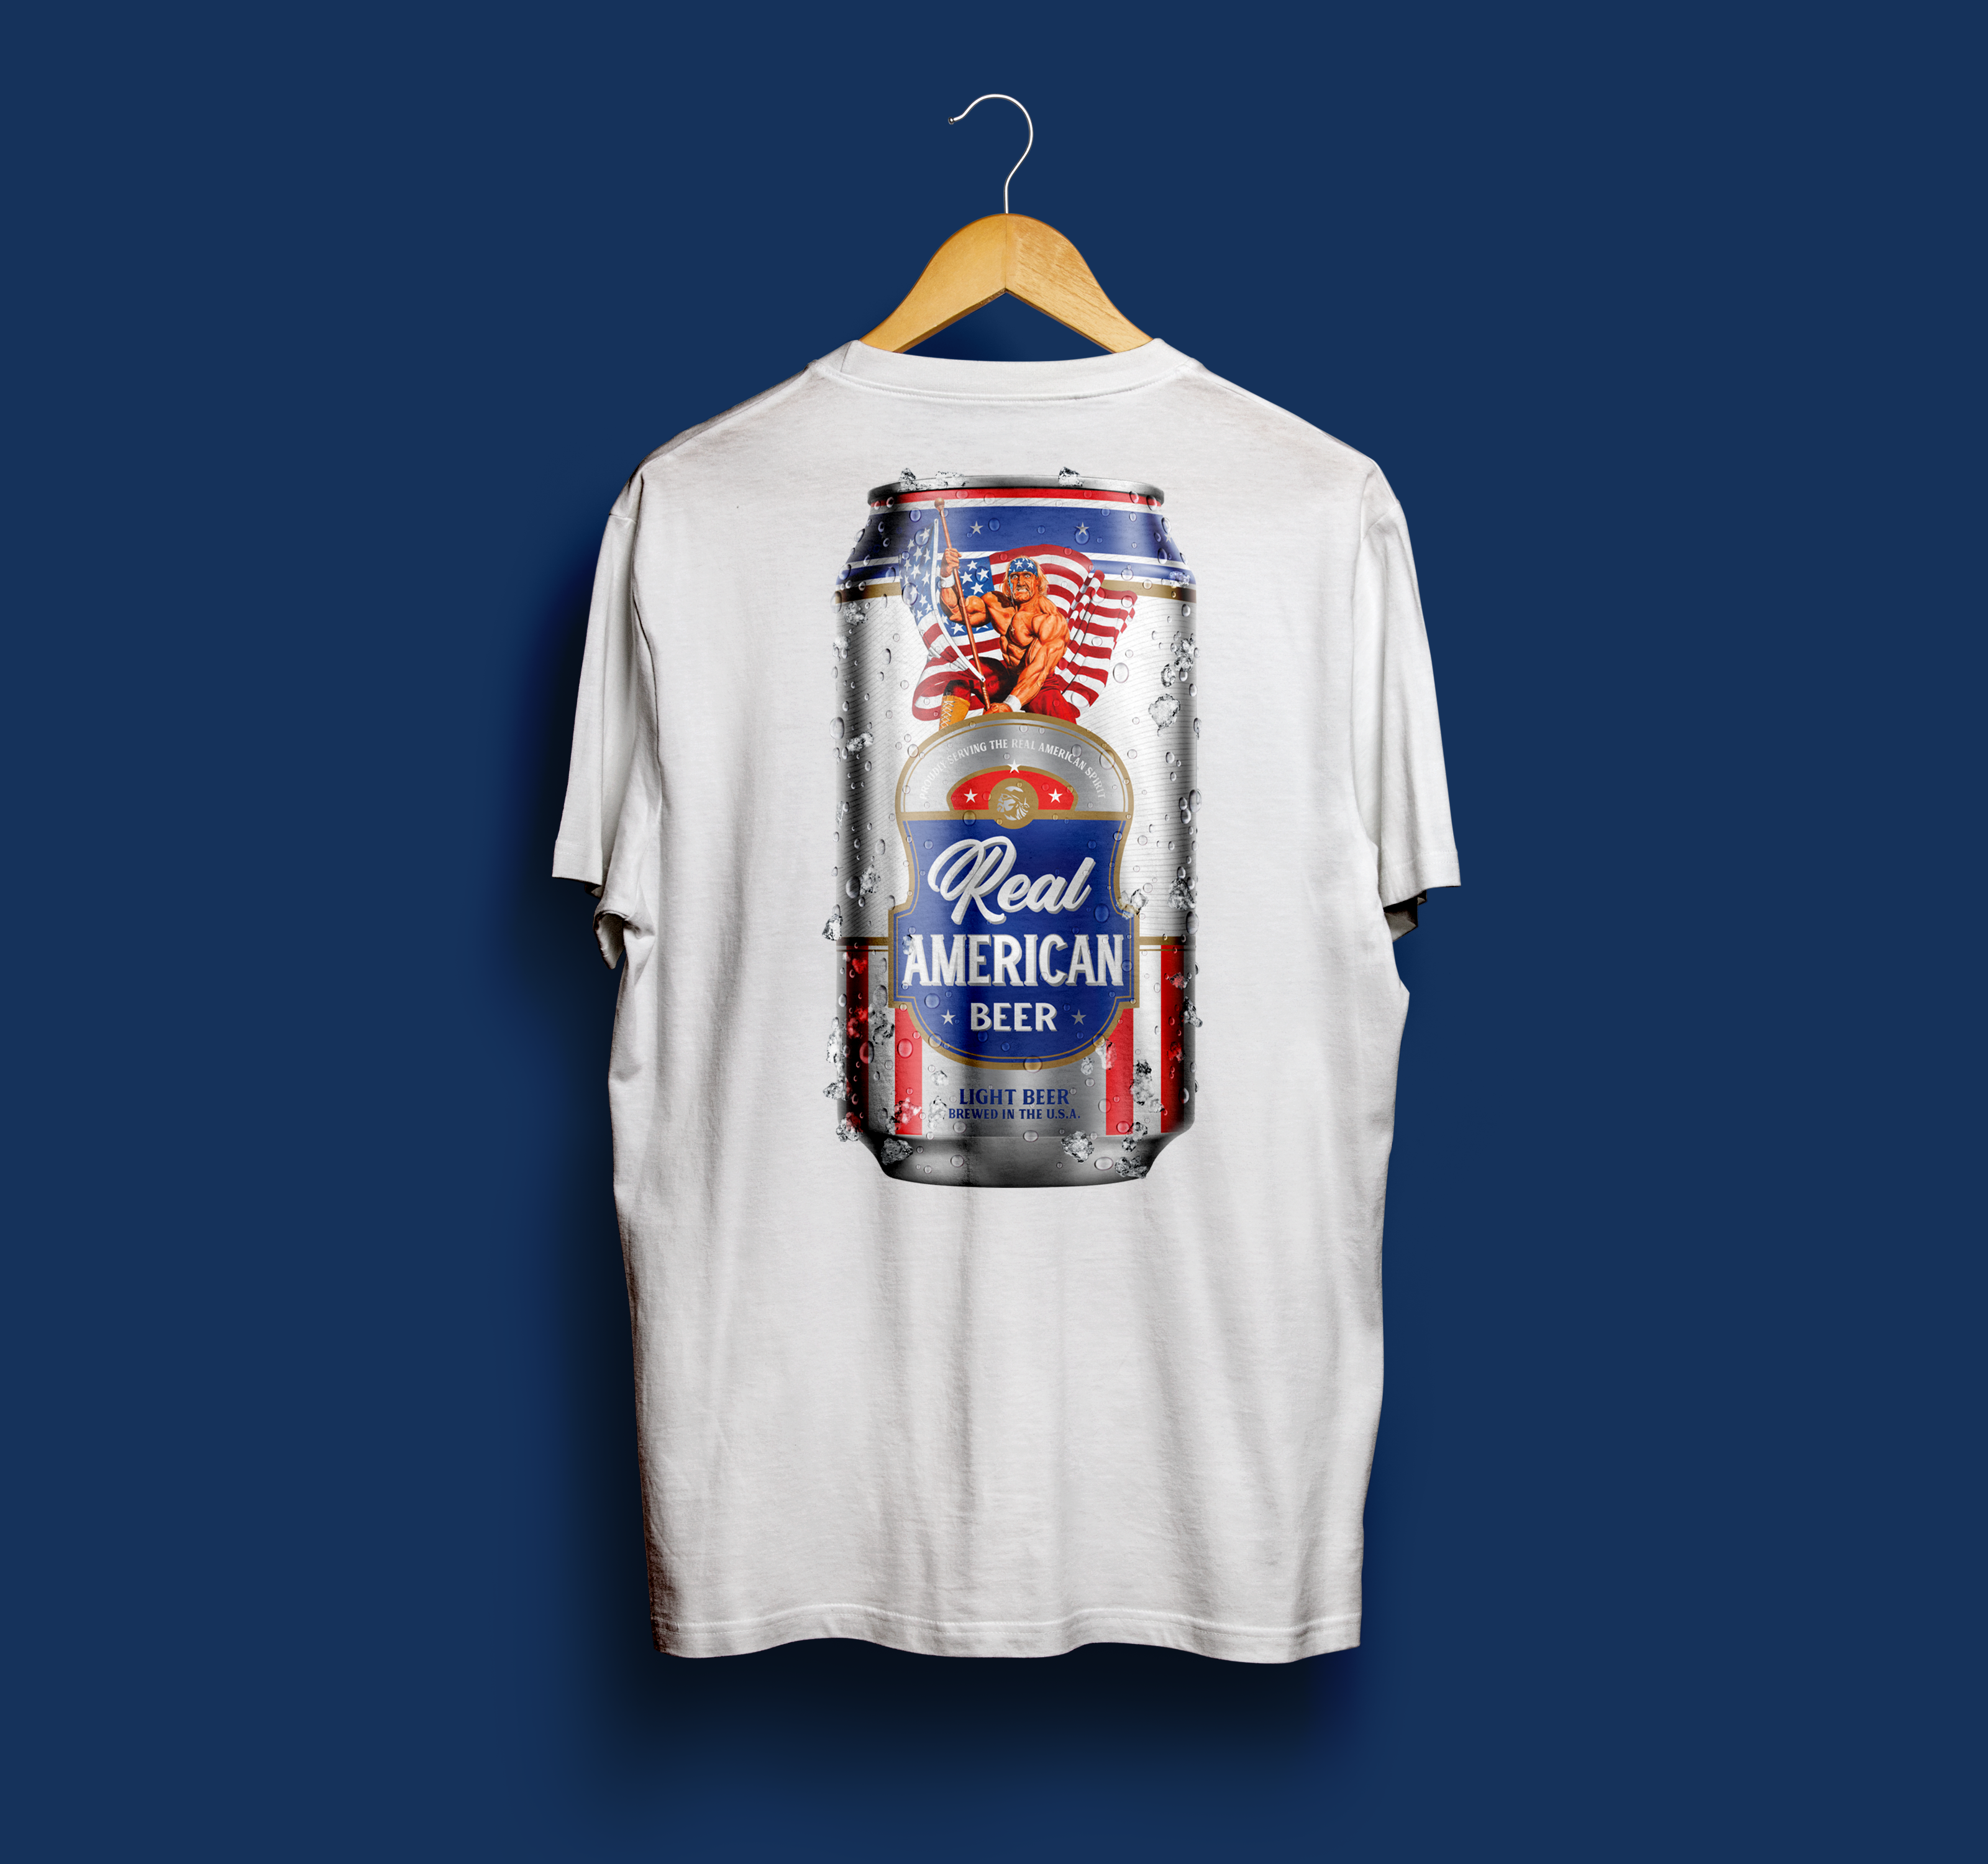 Back – Large beer can on white shirt